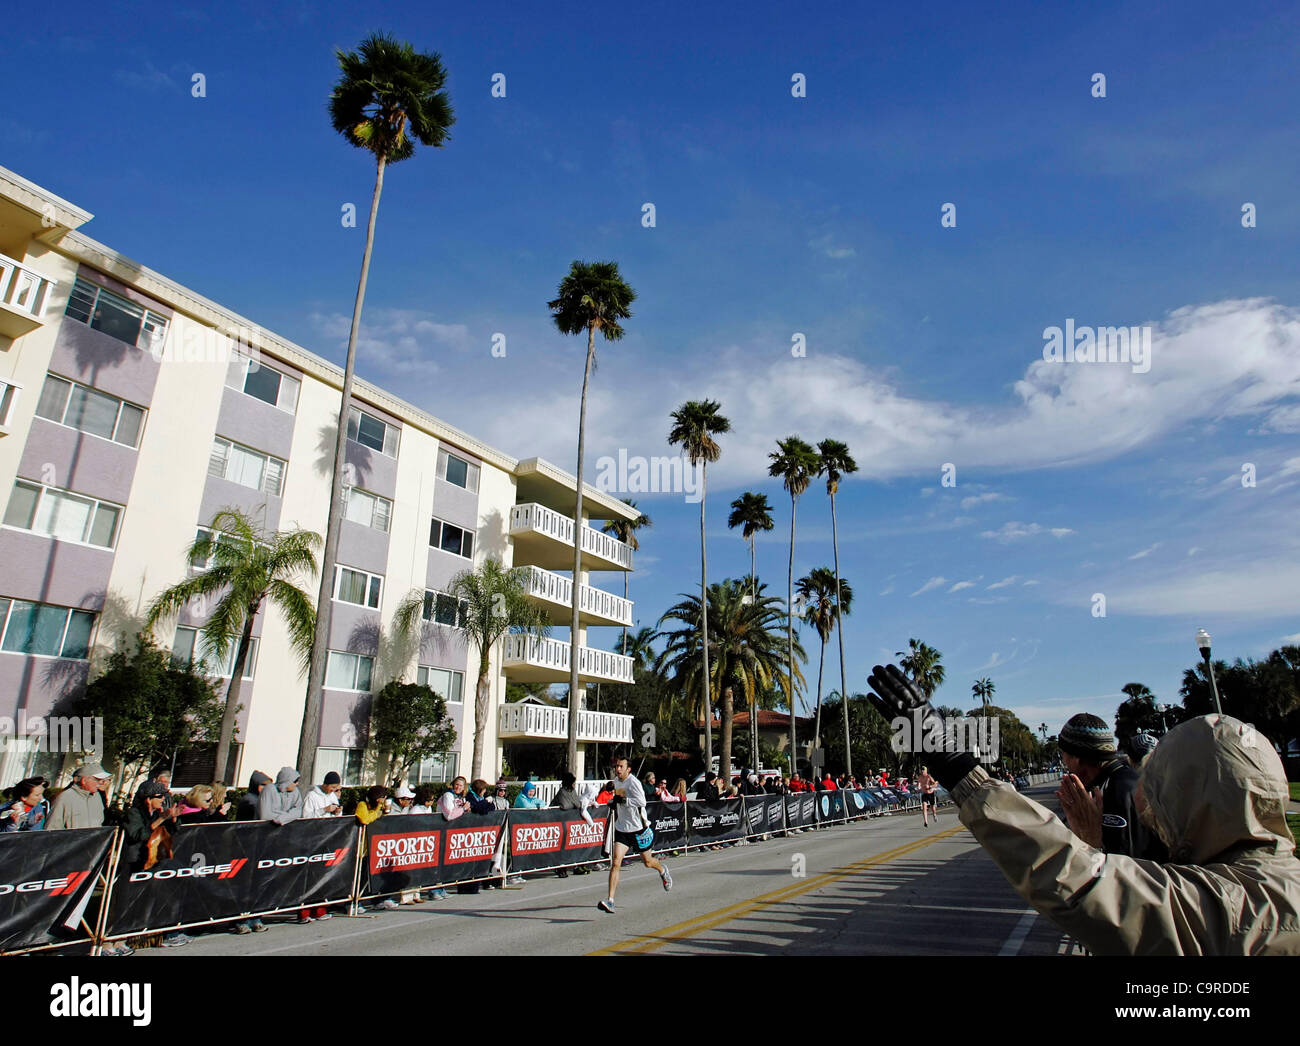 Onlookers wave and cheer as SEAN GALLAGHER of Clearwater, Florida, runs toward the finish line of the inaugural Rock 'n' Roll St. Pete Half Marathon. Gallagher finished 11th with an official time of 1:18:18. Stock Photo